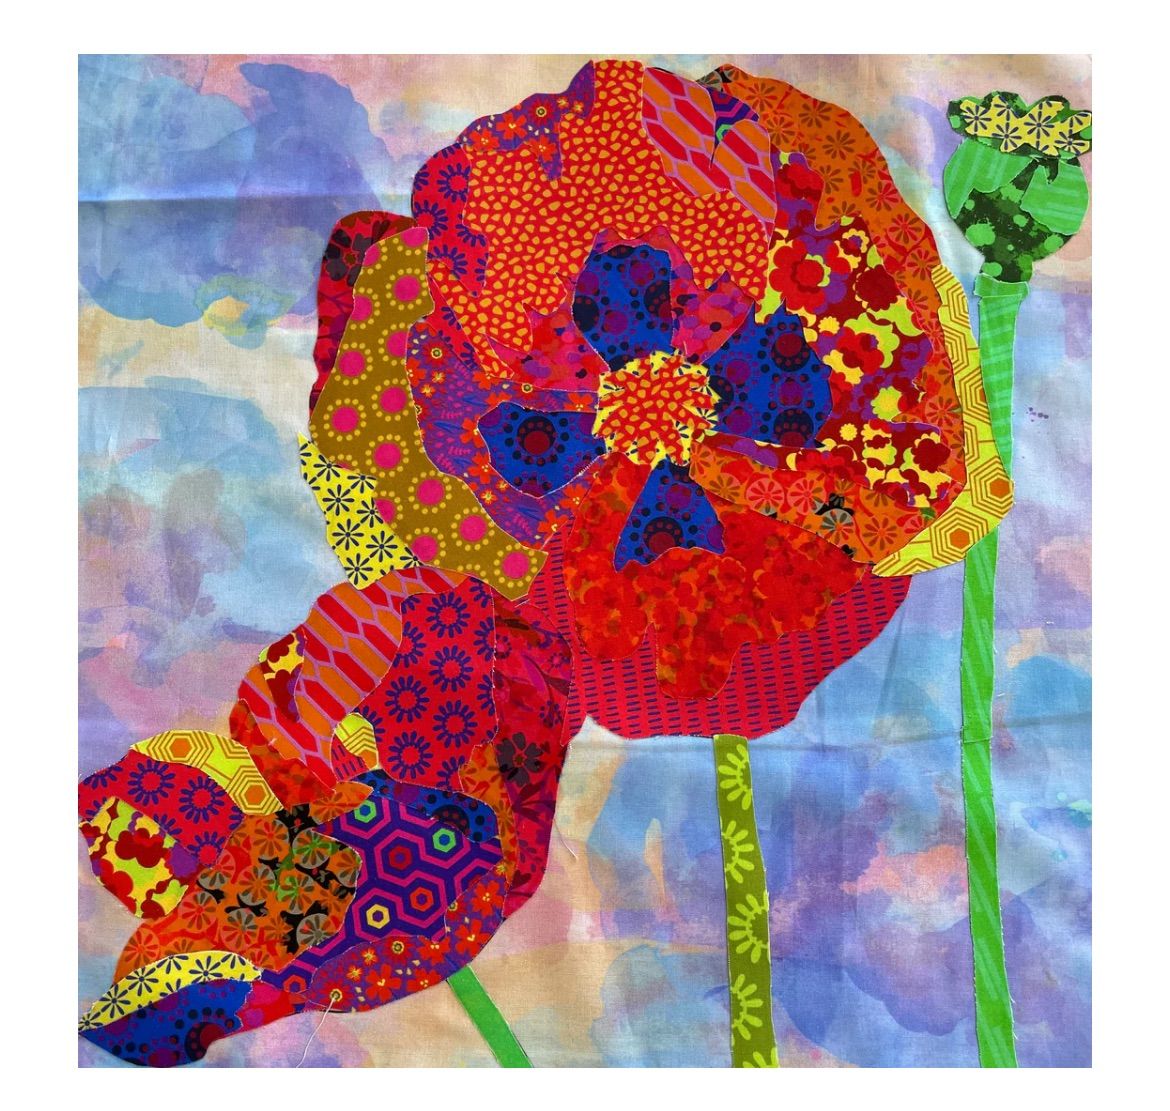 Applique Poppy Workshop with Susan from My Fabricology 